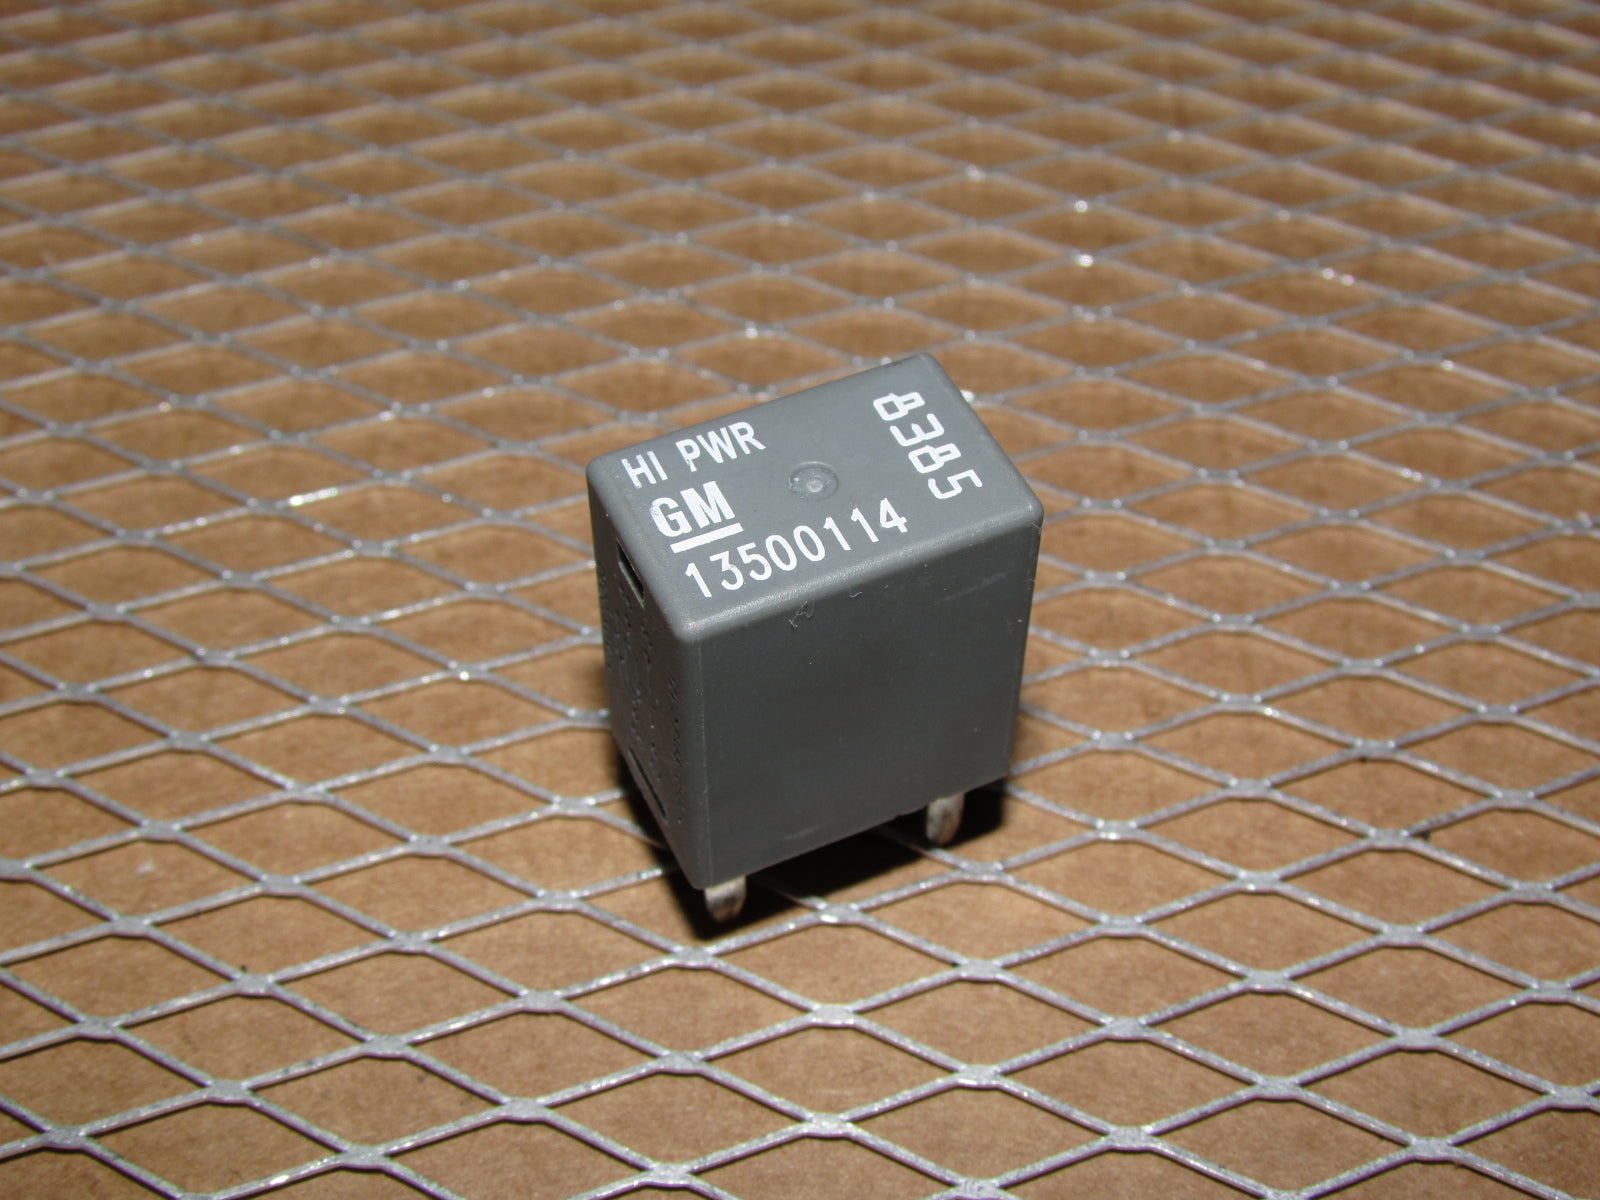 GM Relay 8385 / 13500114